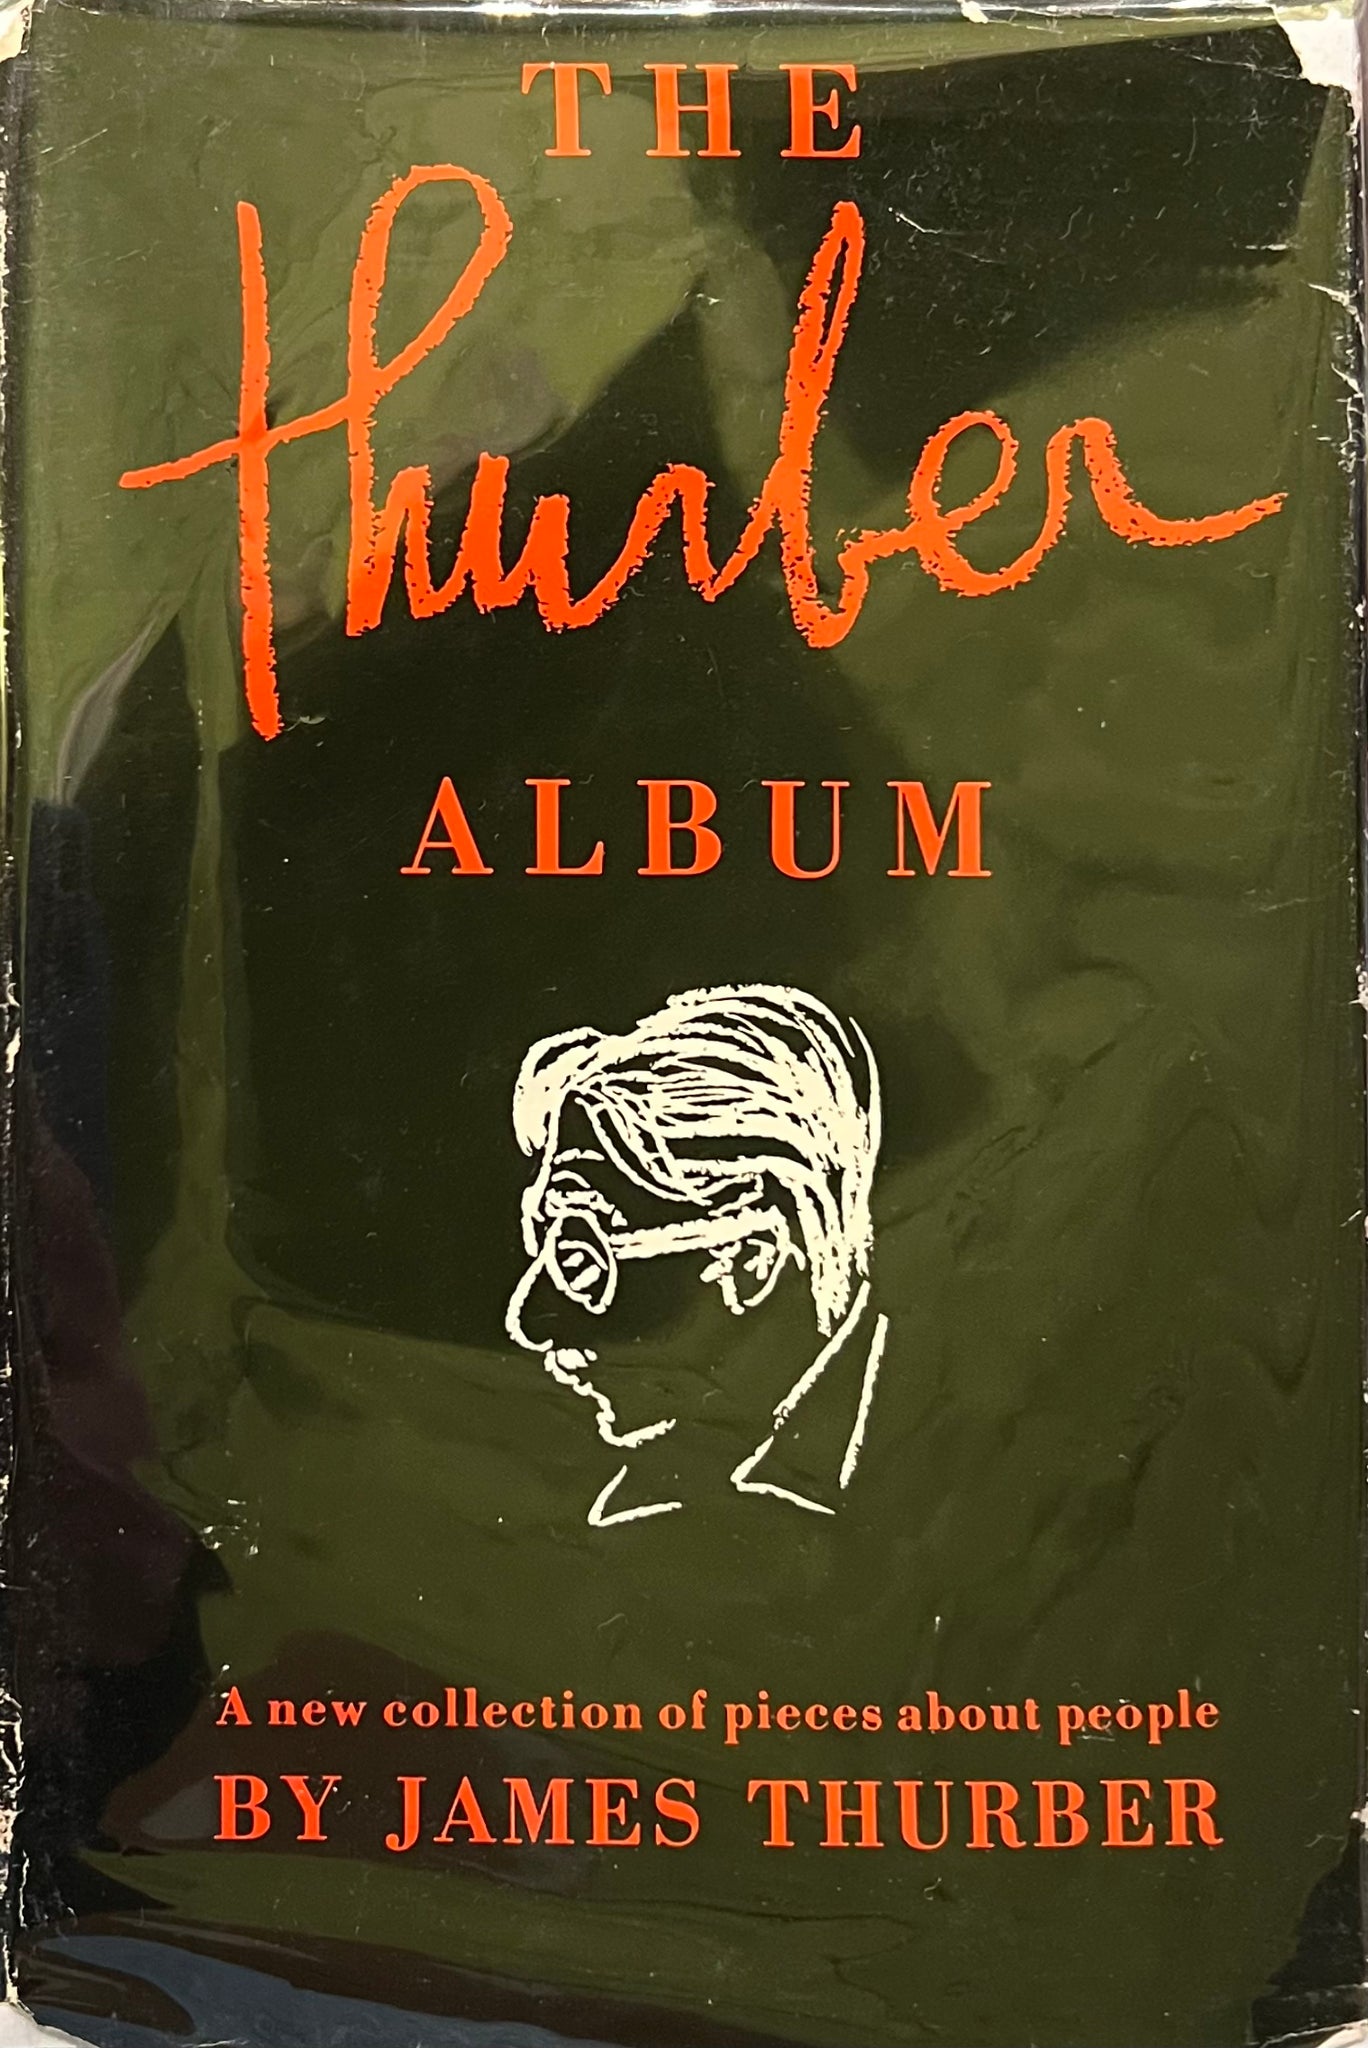 The Thurber Album: A New Collection of Pieces About People, James Thurber